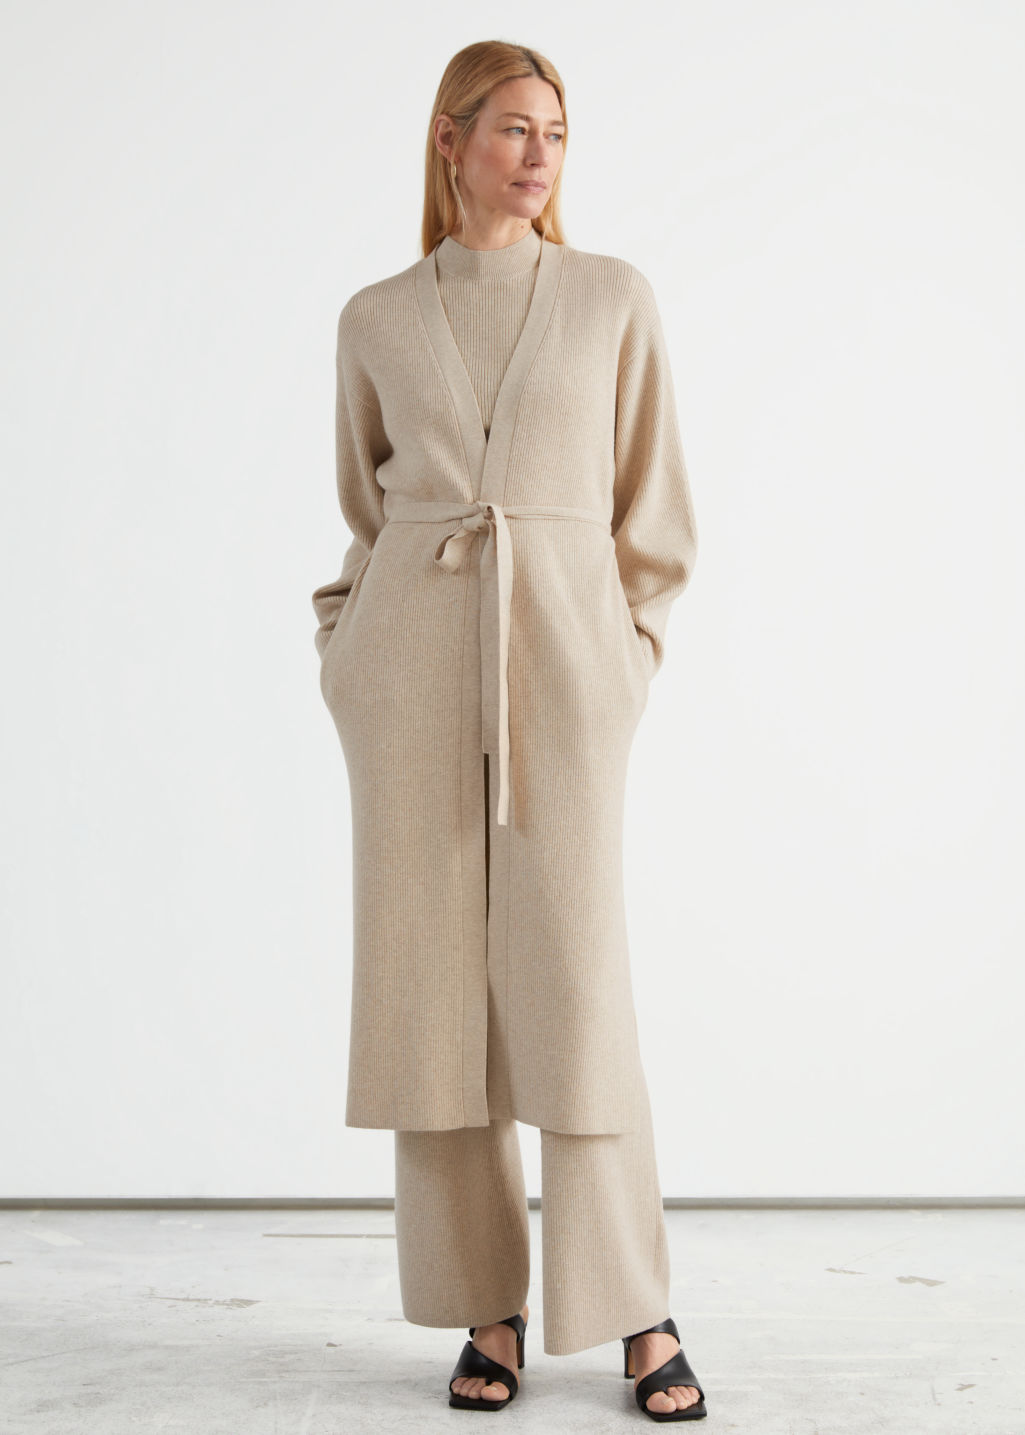 Long Belted Knit Cardigan - Oatmeal - Cardigans - & Other Stories